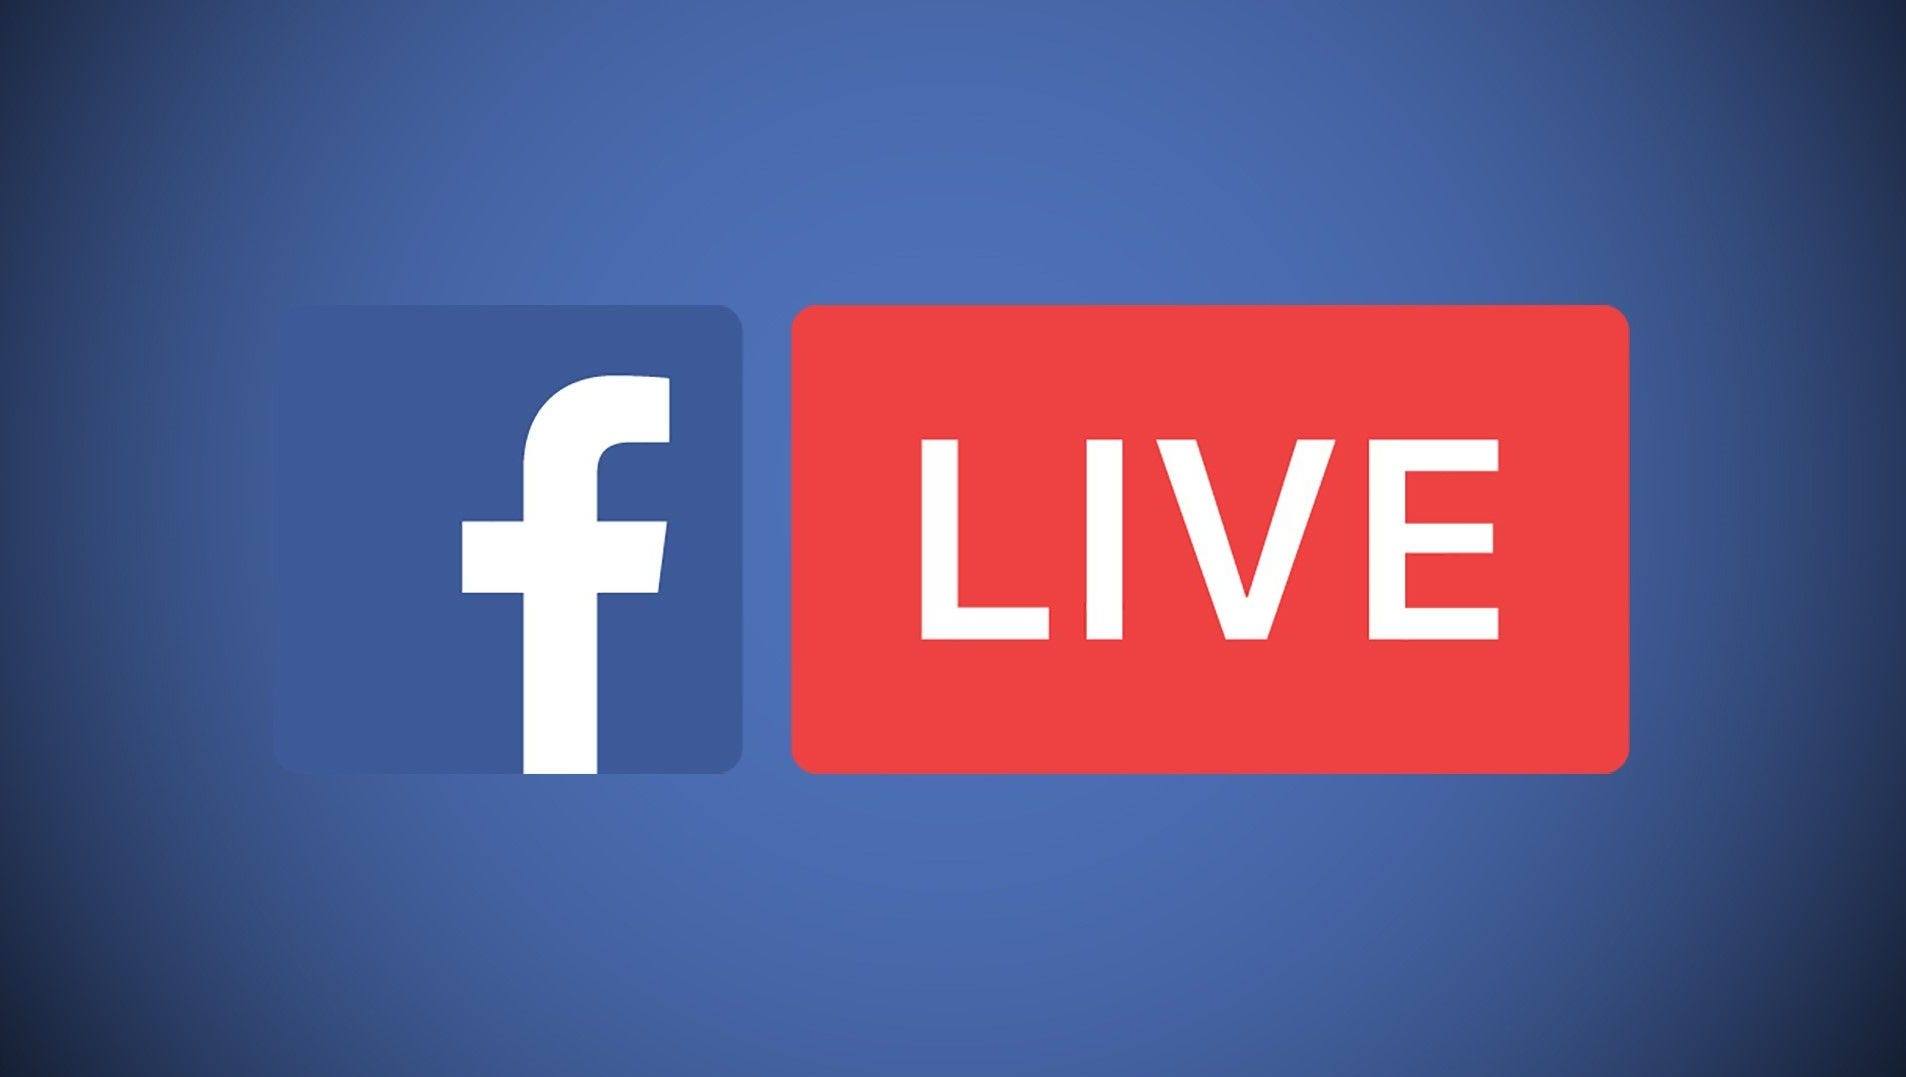 Tips for using Facebook Live for businesses